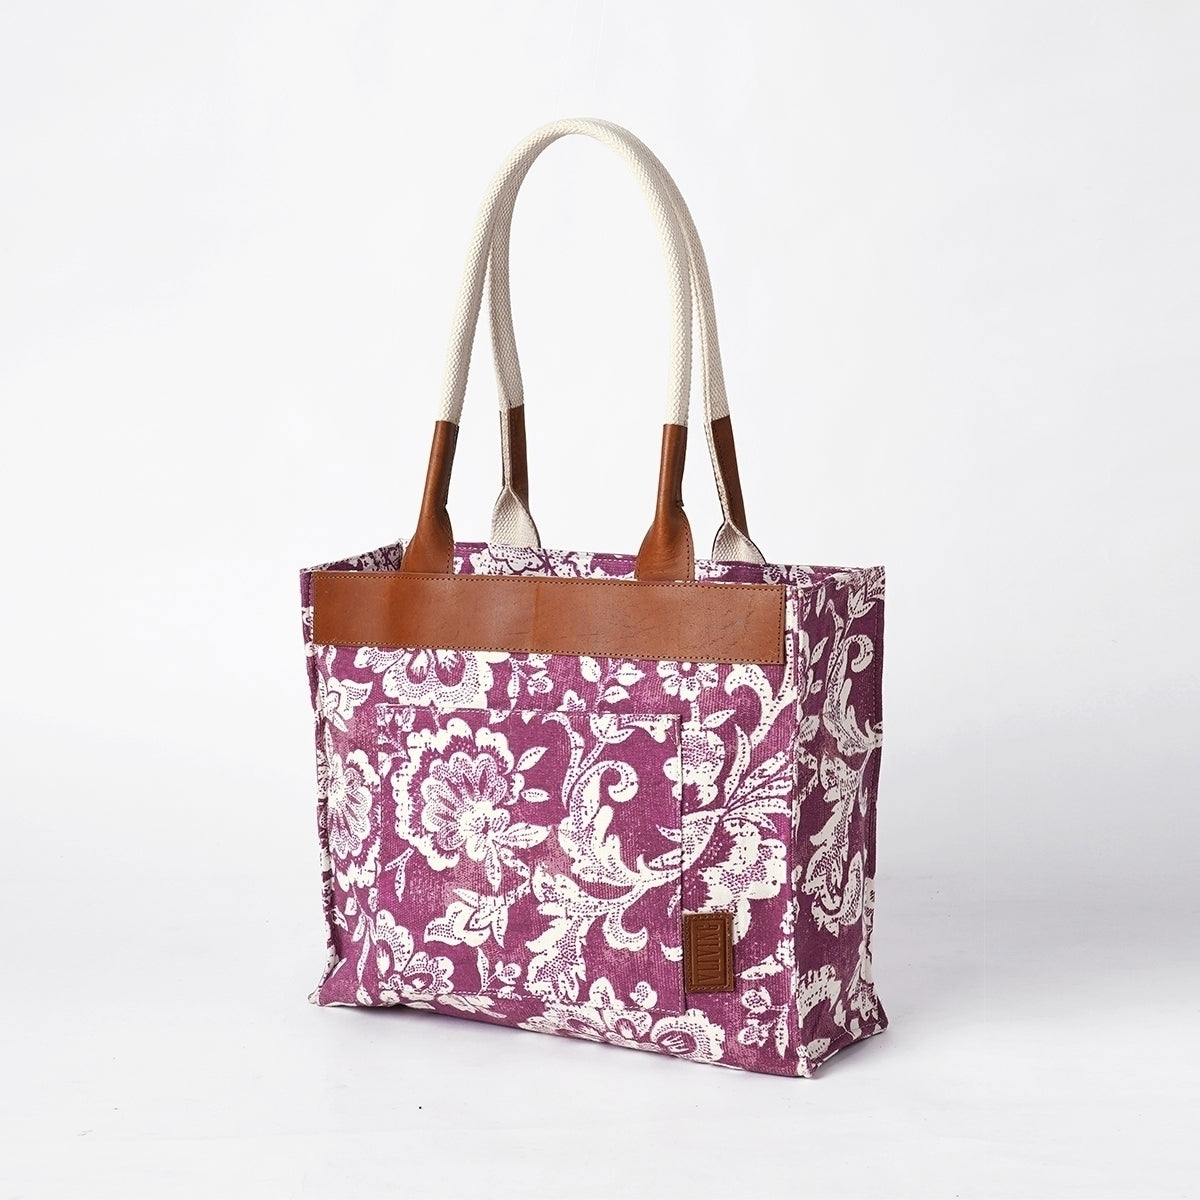 Plum Dominoterie print cotton duck and leather tote bag, large tote, shoulder bag.